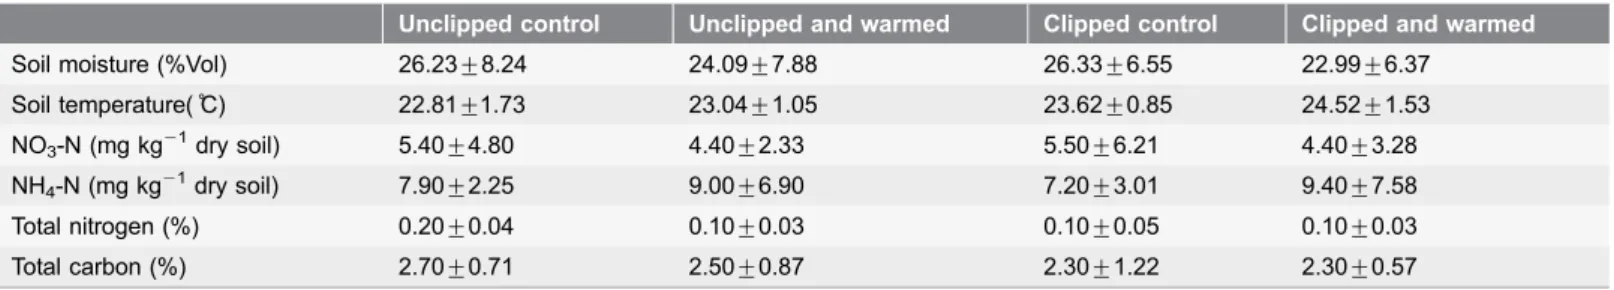 Table 1. Mean soil moisture, soil temperature, NO 3 N, NH 4 N, total nitrogen, and total carbon before incubation under four treatments in May 2009.